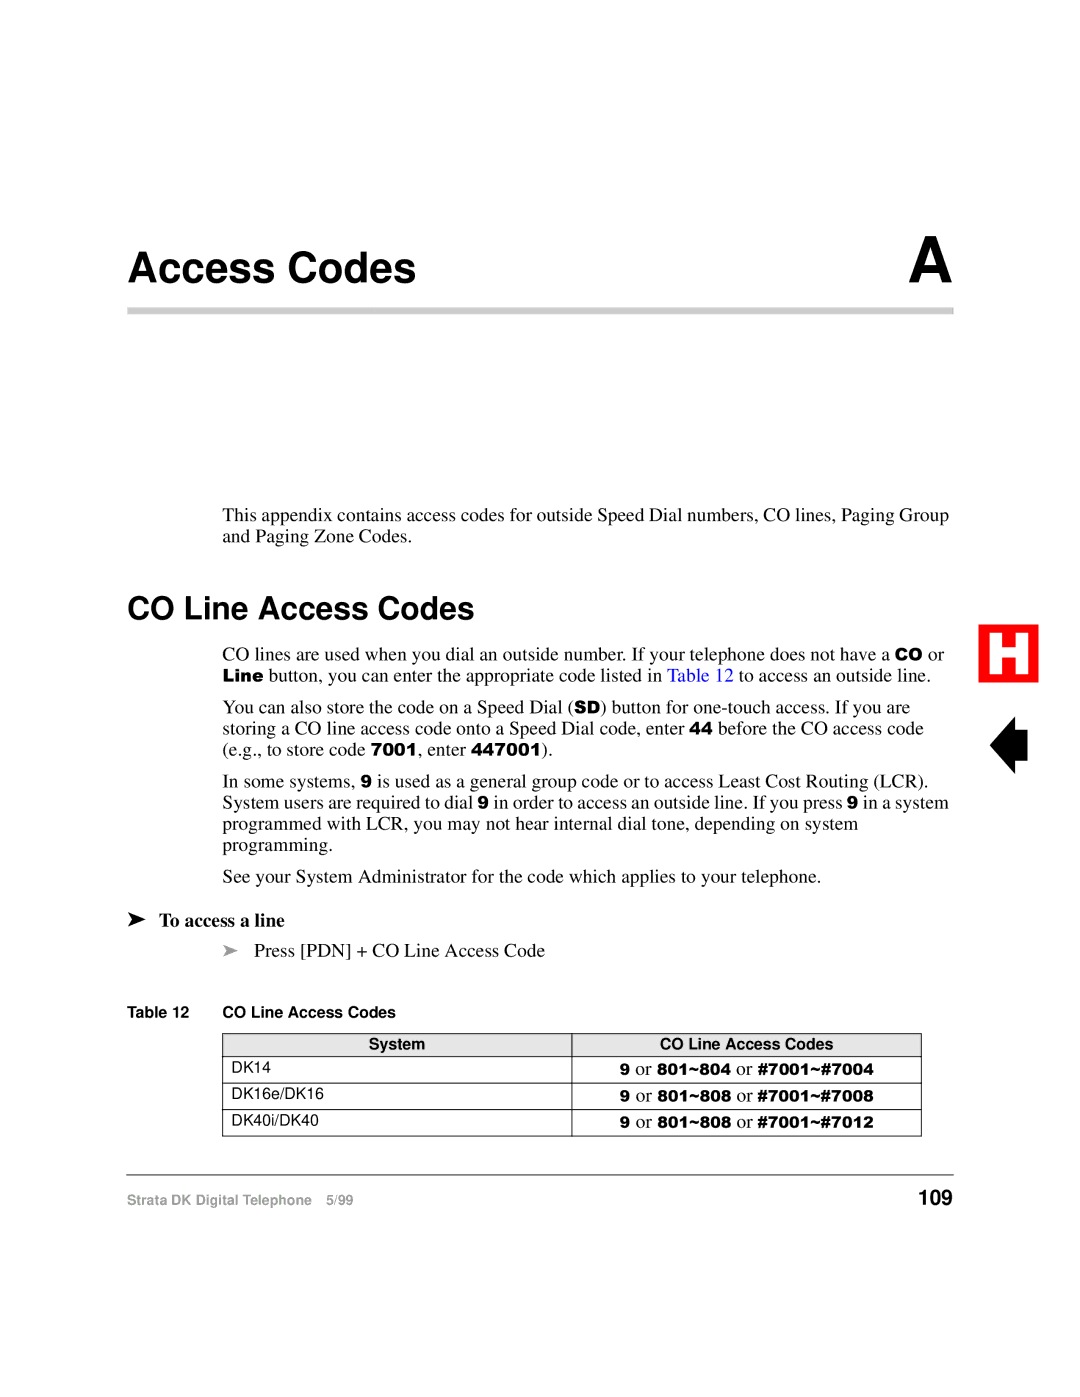 Toshiba Digital Telephone manual CO Line Access Codes, 109, To access a line 